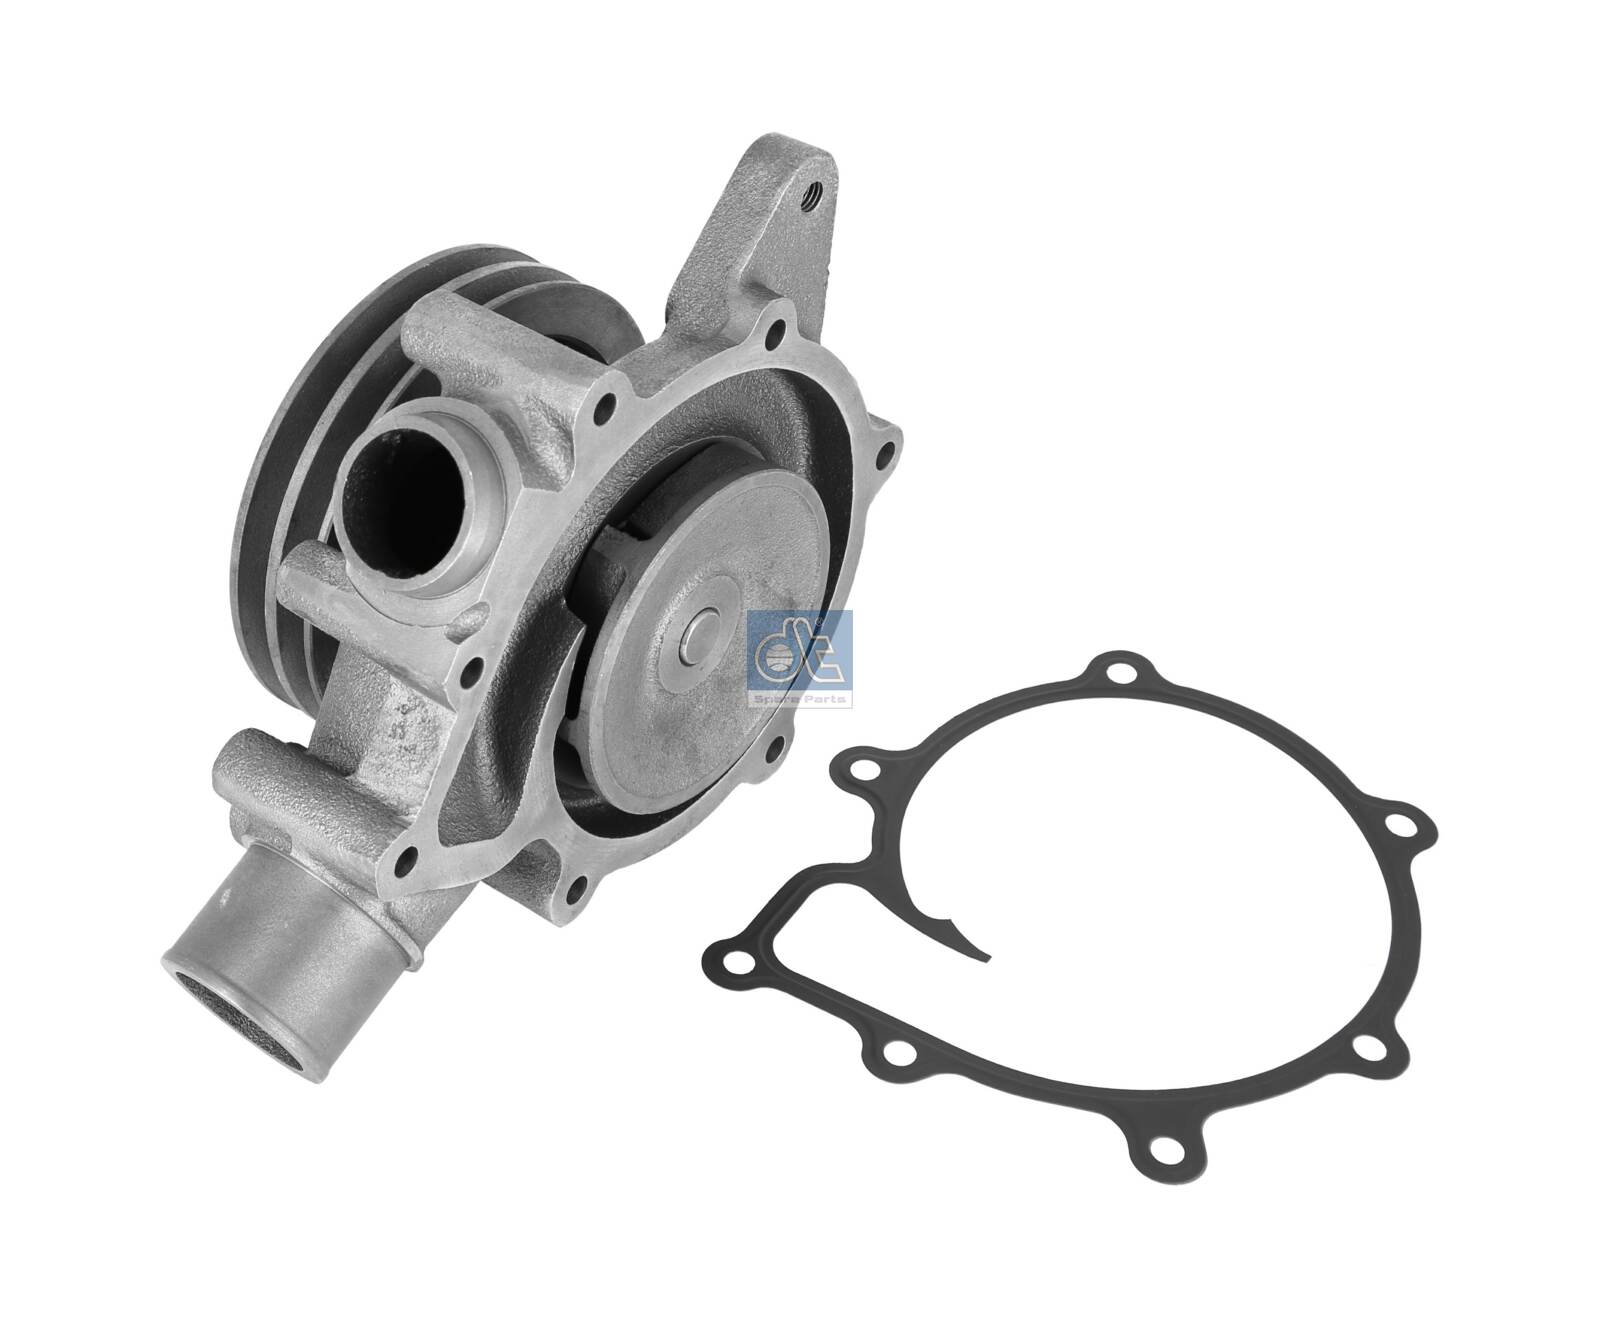 6.30012, Water Pump, engine cooling, DT Spare Parts, 5001865041, 5010450892, 7422485206, 078.124, 082000040226, 16332200003, 24-1390, 250.038-00A, 33196, 4057795659360, 78200113, 8MP376808-474, DP784, 078124, 16-332200003, 2201151, 241390, 25003800A, 4057795659346, 8MP376808474